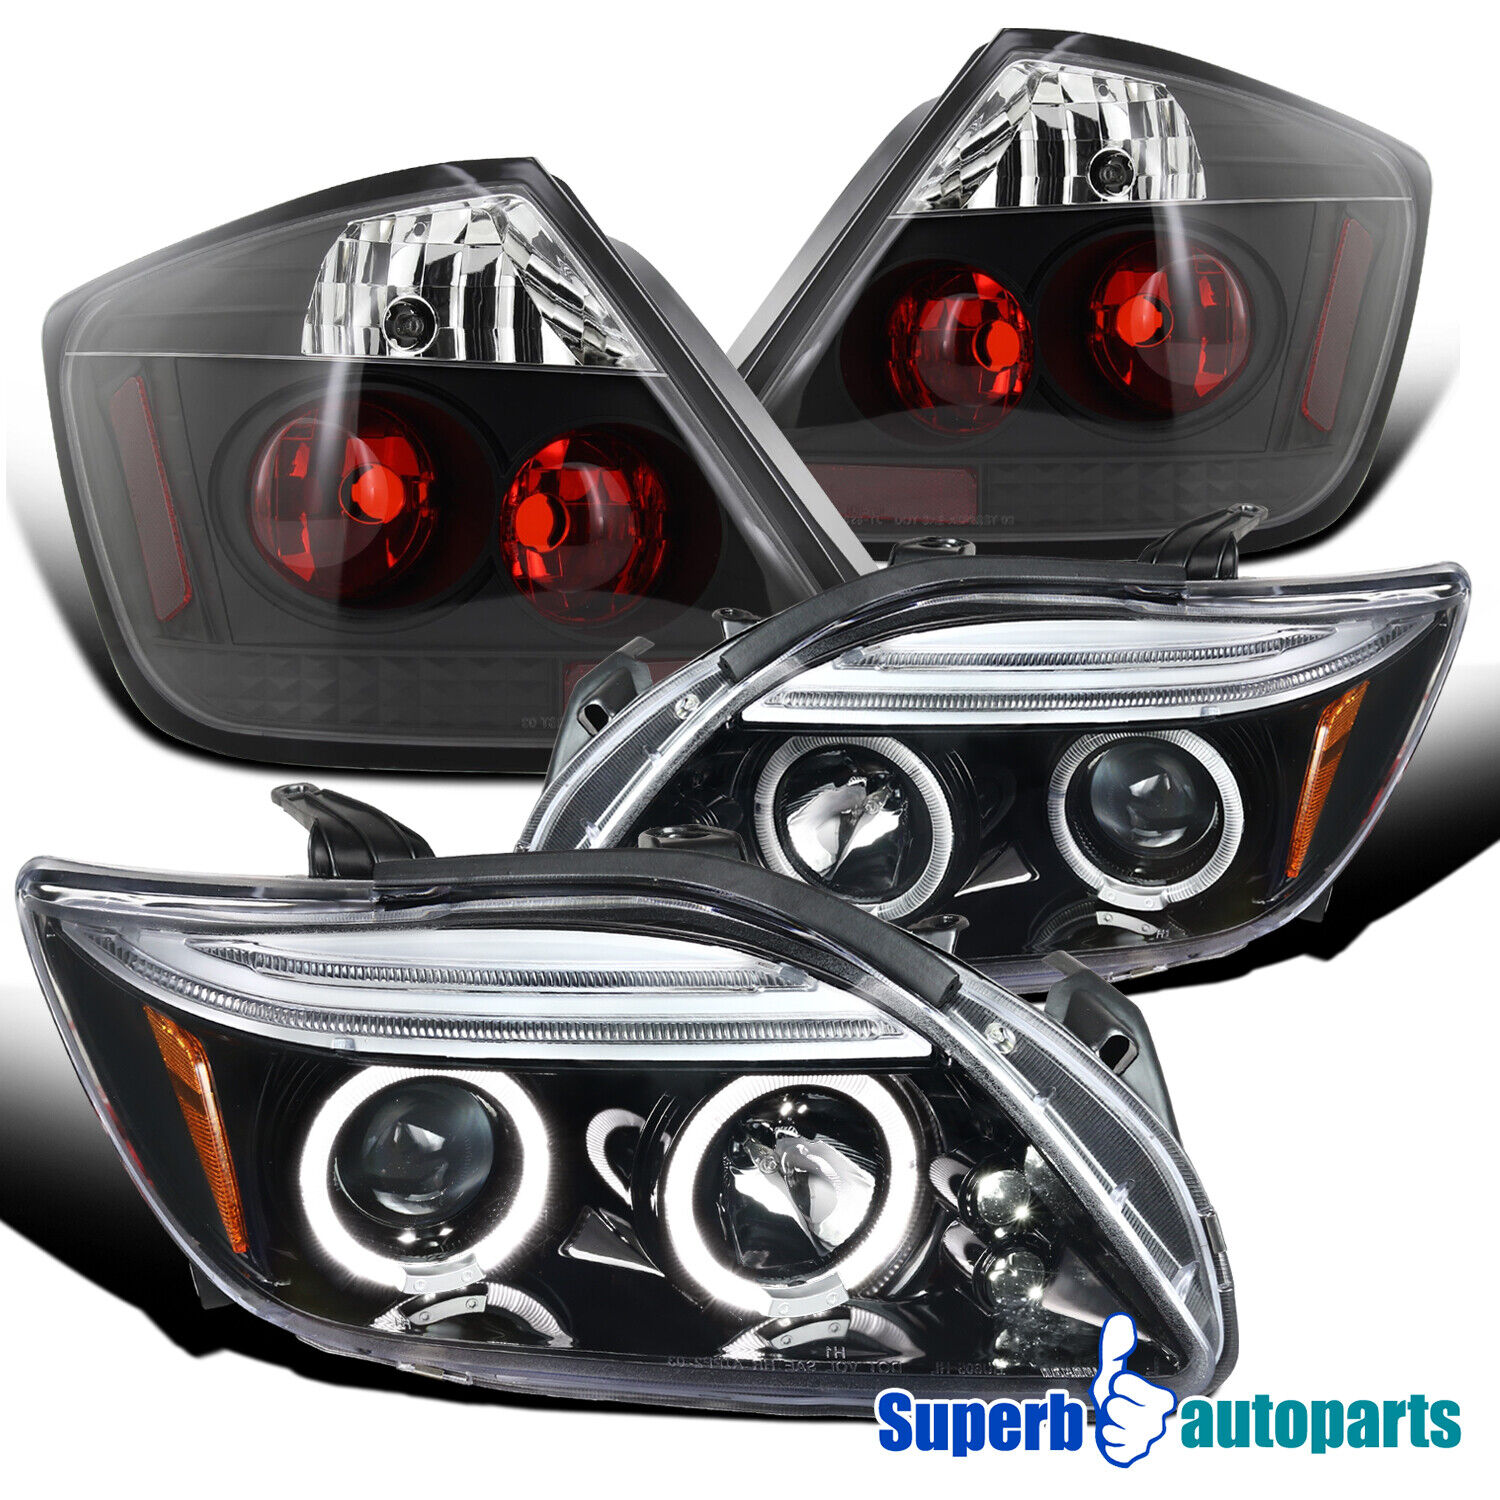 Fits 2005-2010 Scion tC Polished Black LED Halo Projector Headlights+Tail Lamps